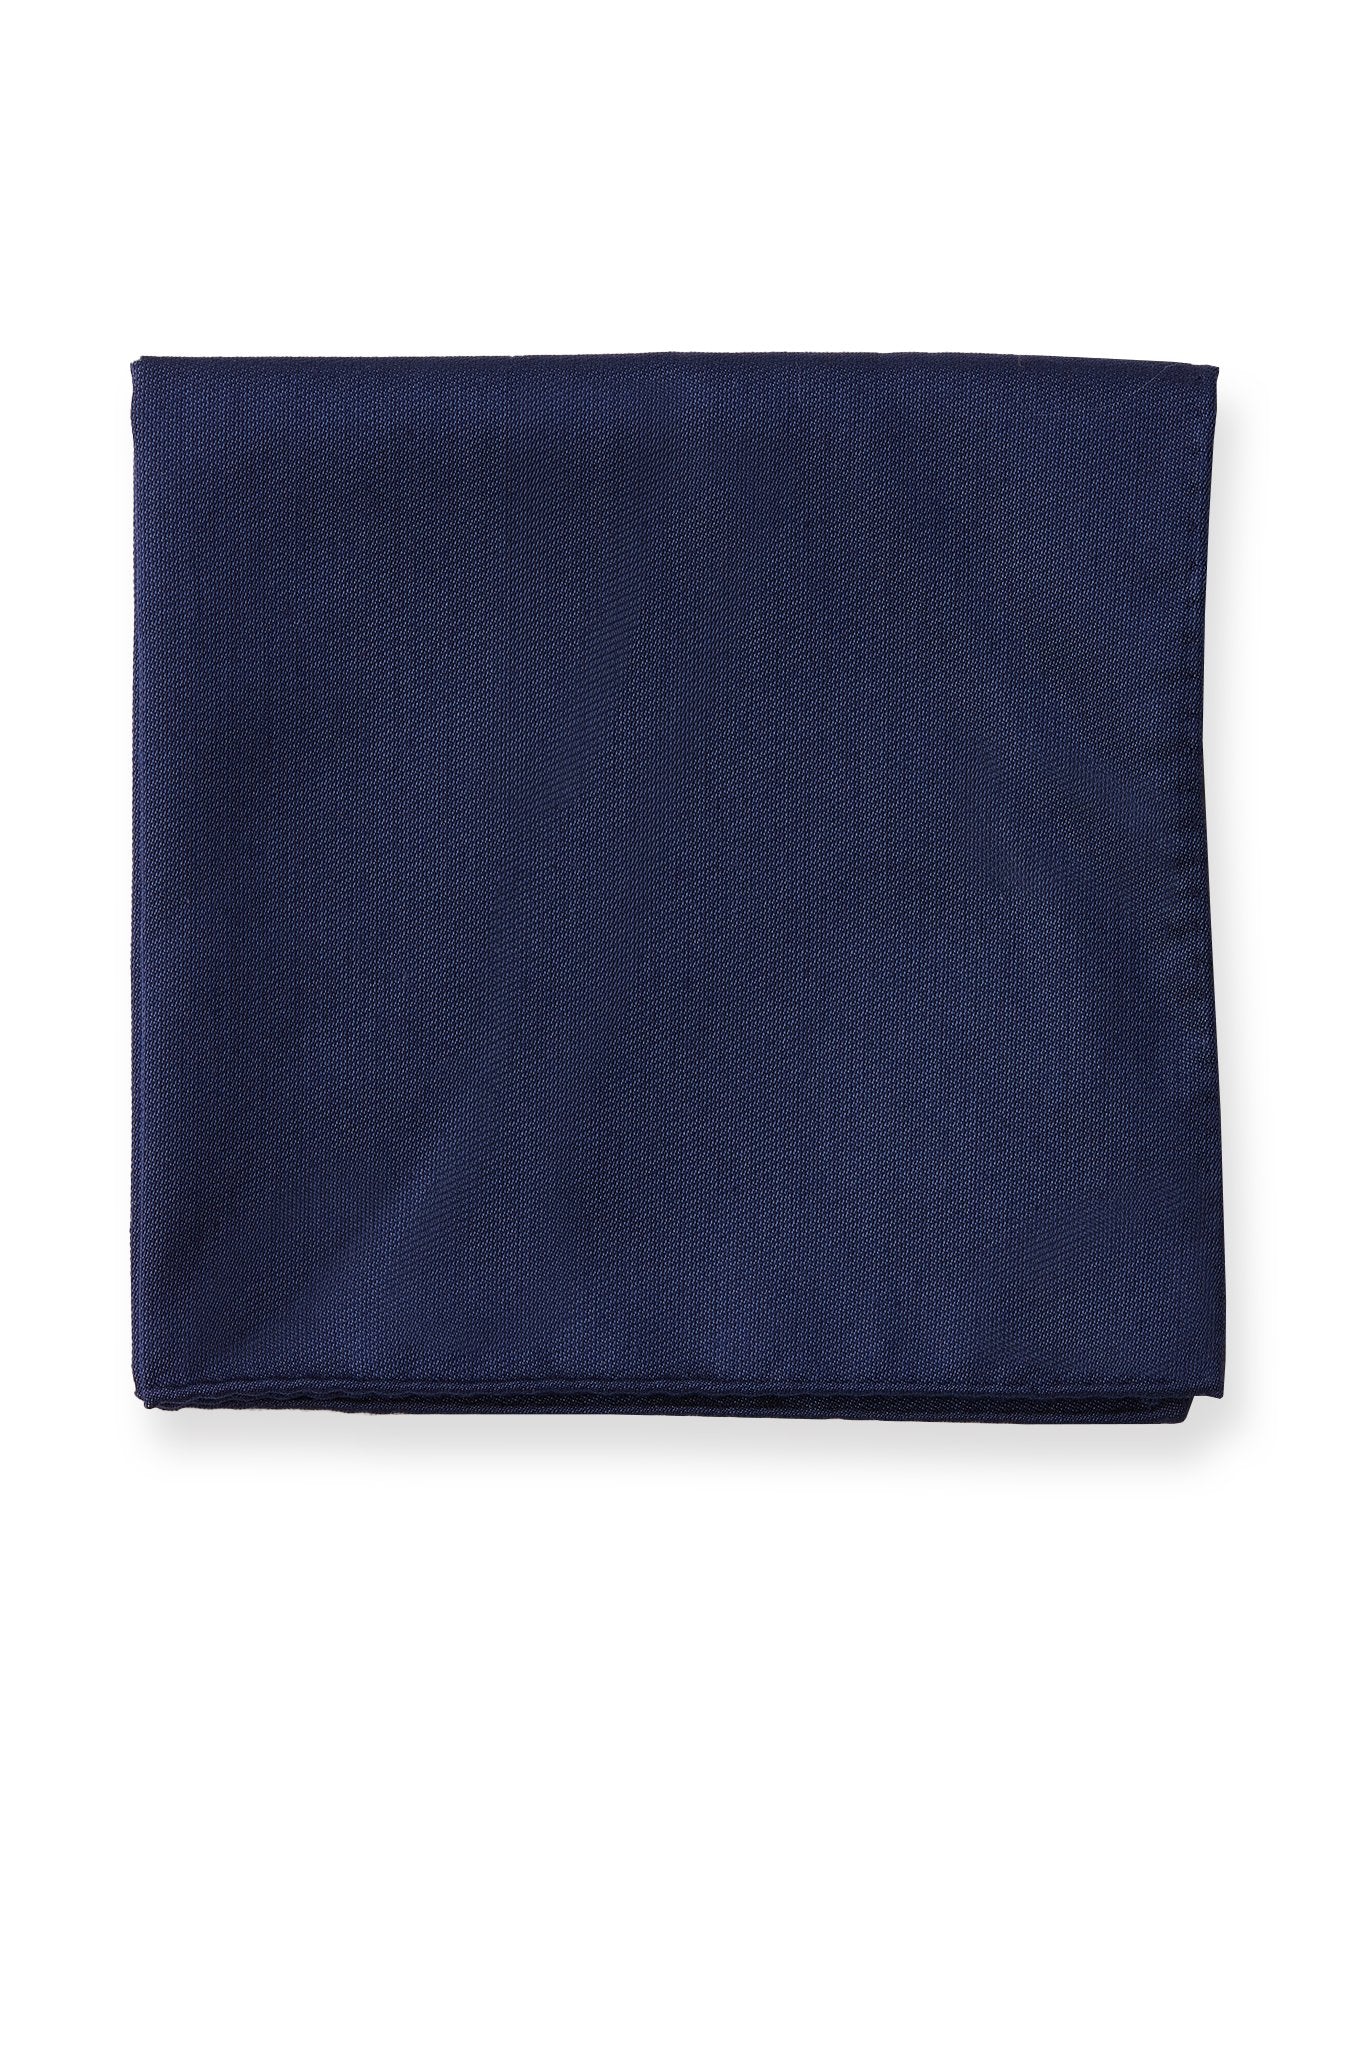 Didi Pocket Square in navy blue by Birdy Grey, front view